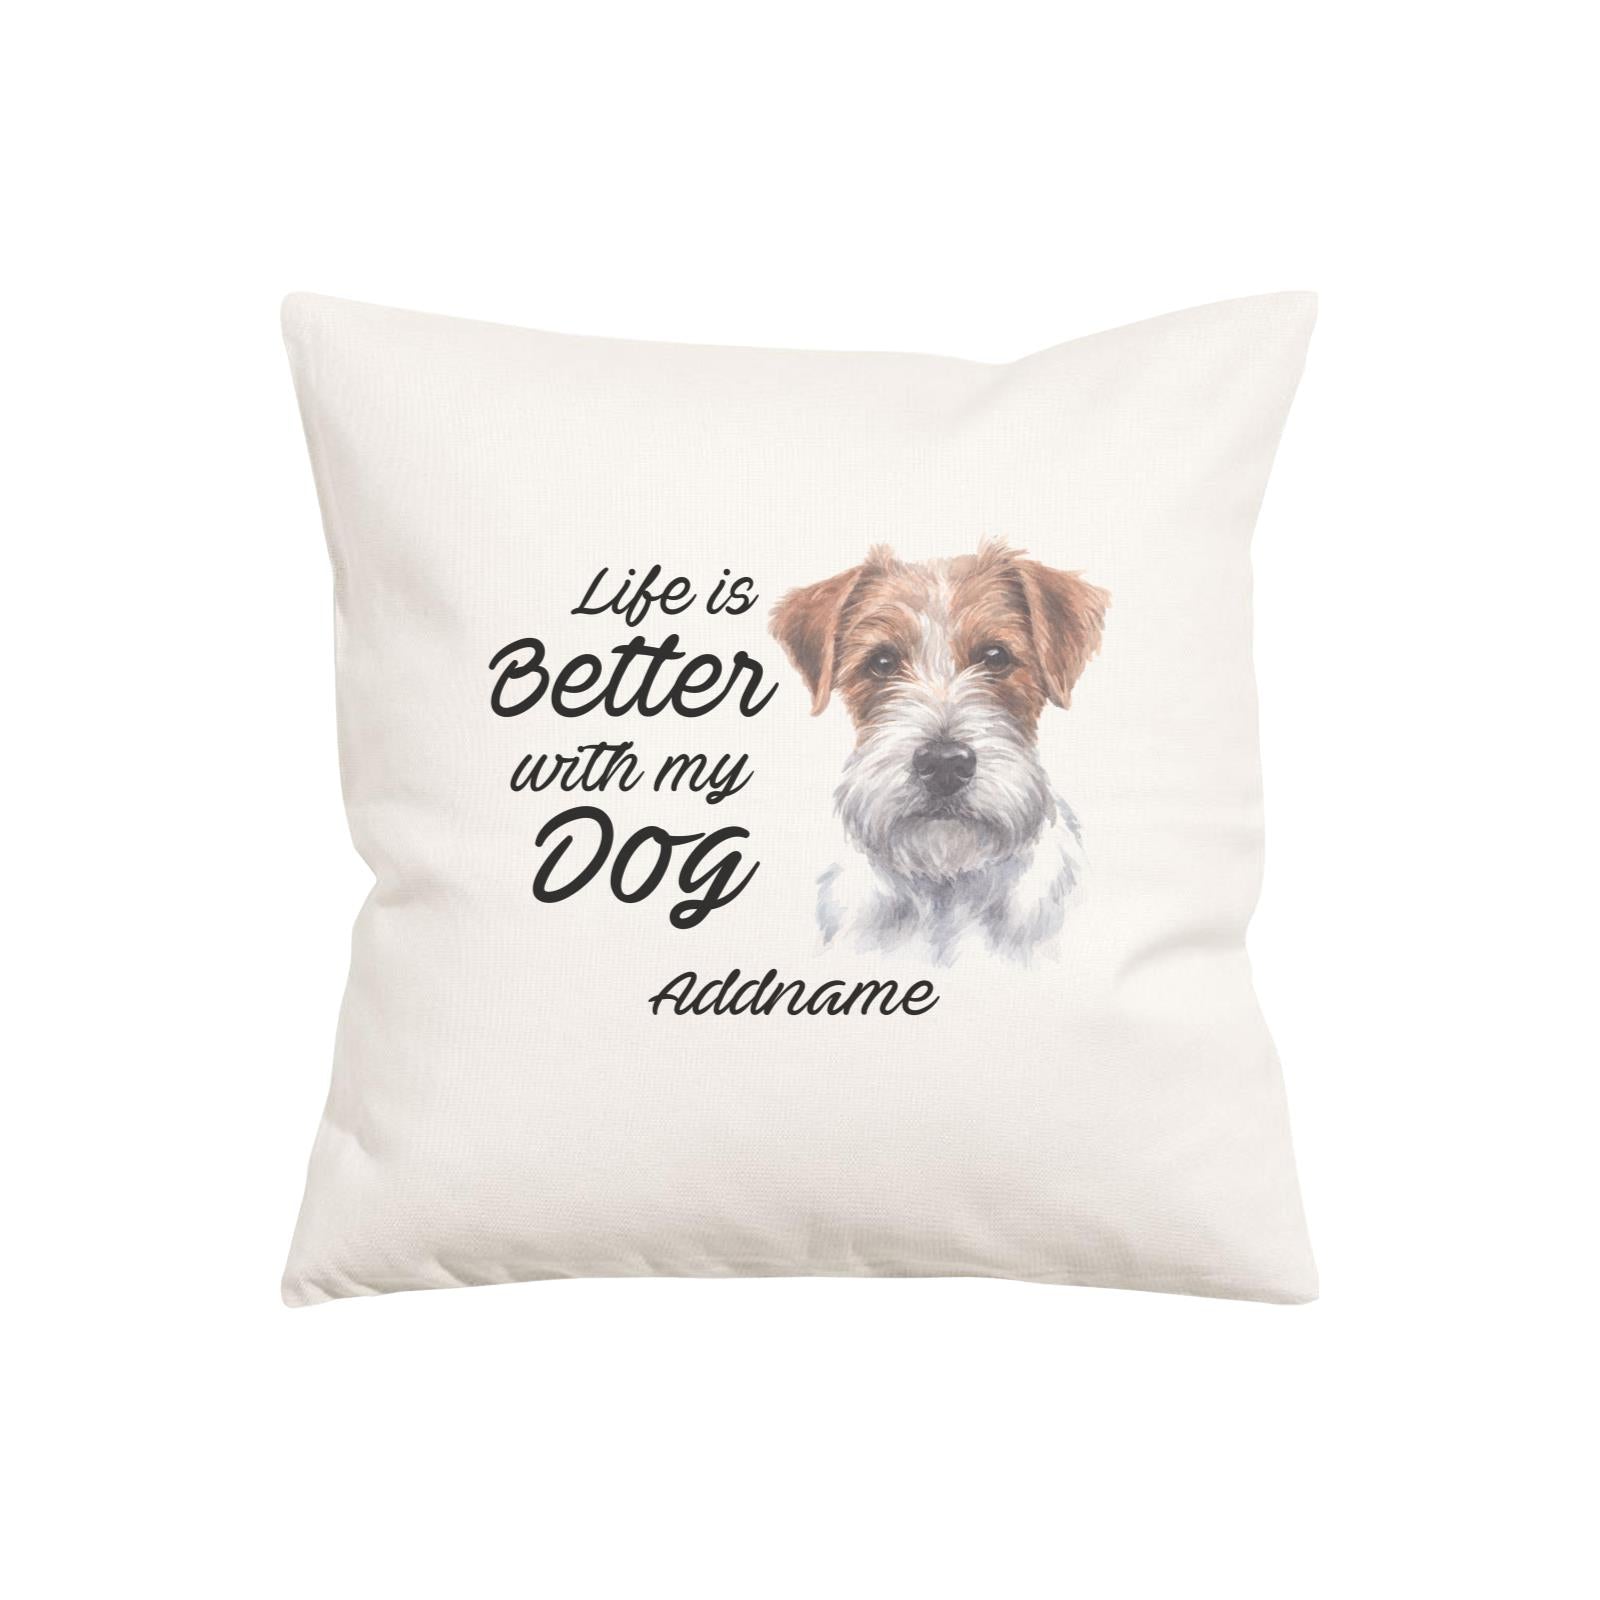 Watercolor Life is Better With My Dog Jack Russell Long Hair Addname Pillow Cushion